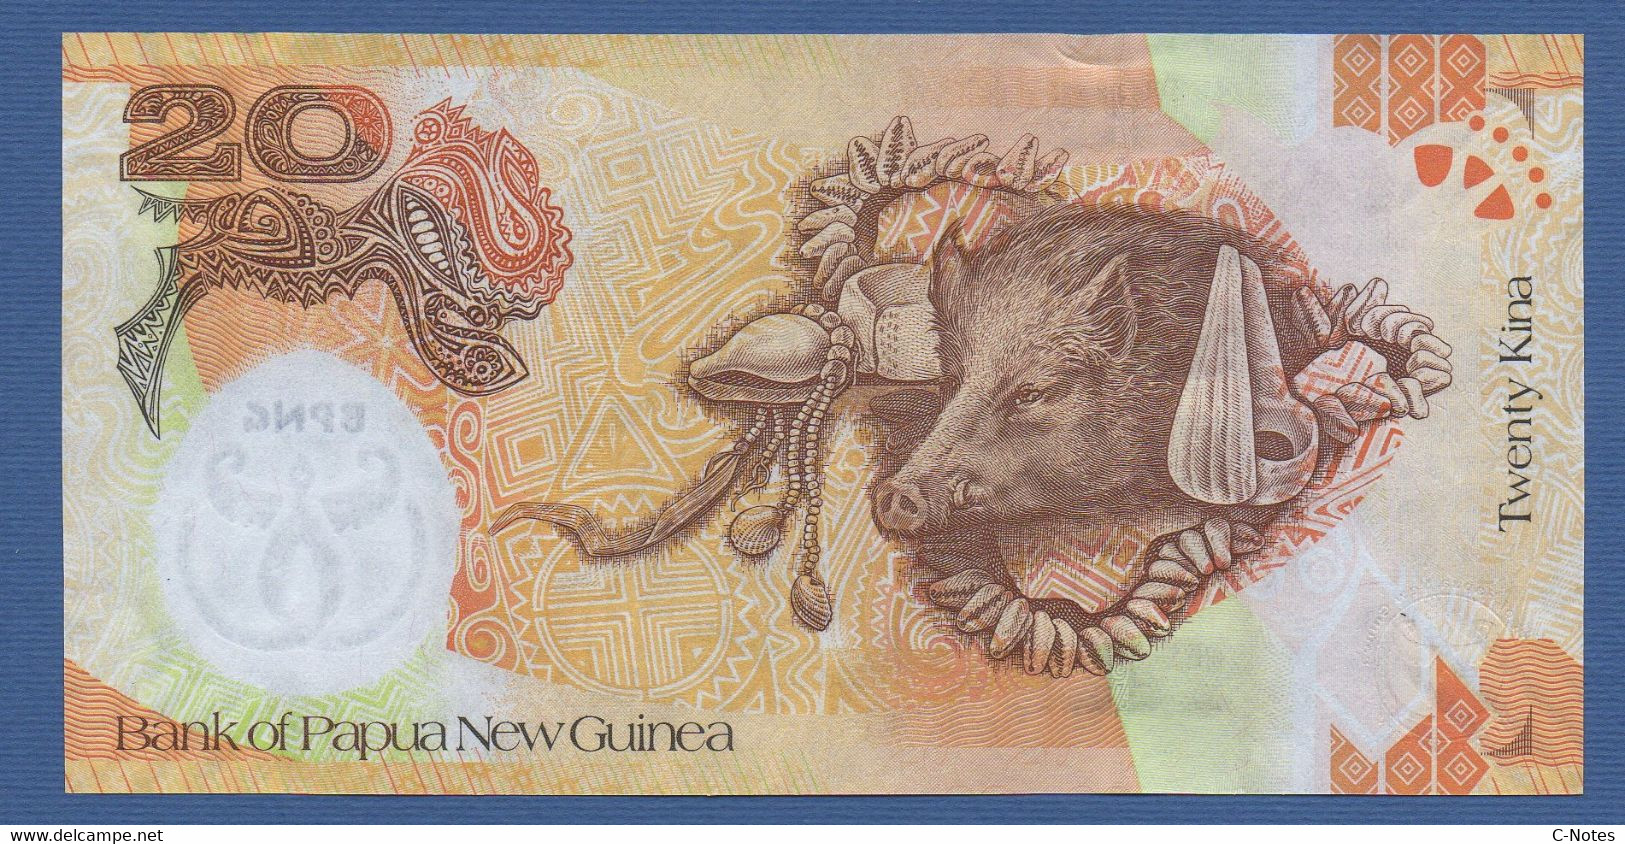 PAPUA NEW GUINEA - P.36 – 100 KINA ND 2008, "35th Anniversary Bank" Commemorative Issue, UNC, Serie BPNG5640410 - Papouasie-Nouvelle-Guinée